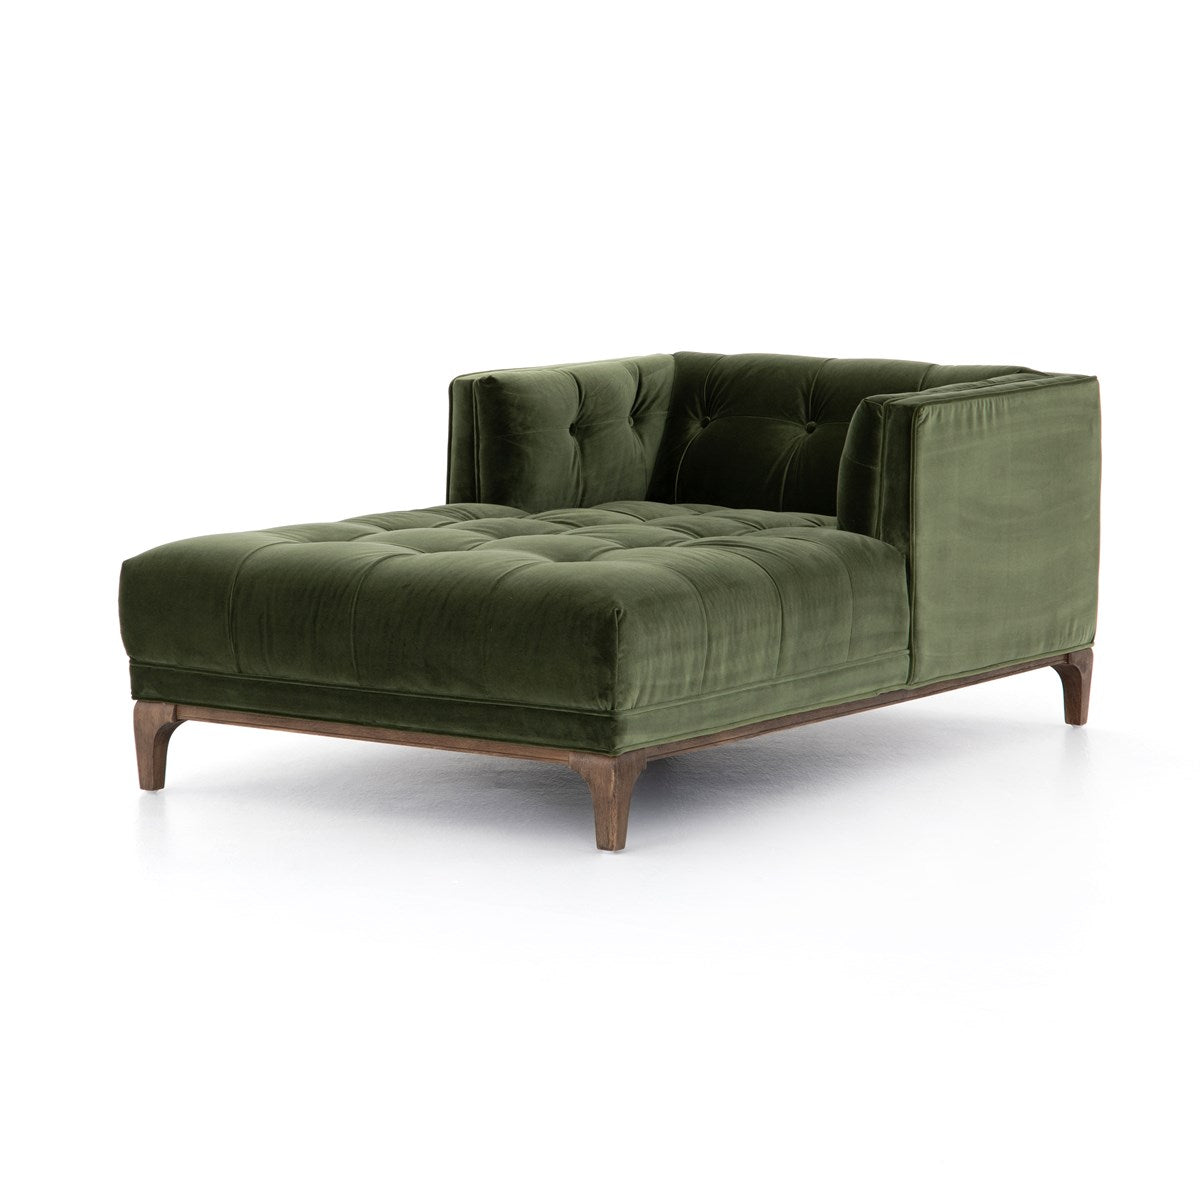 Dylan Chaise-Sapphire Olive Chaise Four Hands     Four Hands, Burke Decor, Mid Century Modern Furniture, Old Bones Furniture Company, Old Bones Co, Modern Mid Century, Designer Furniture, https://www.oldbonesco.com/